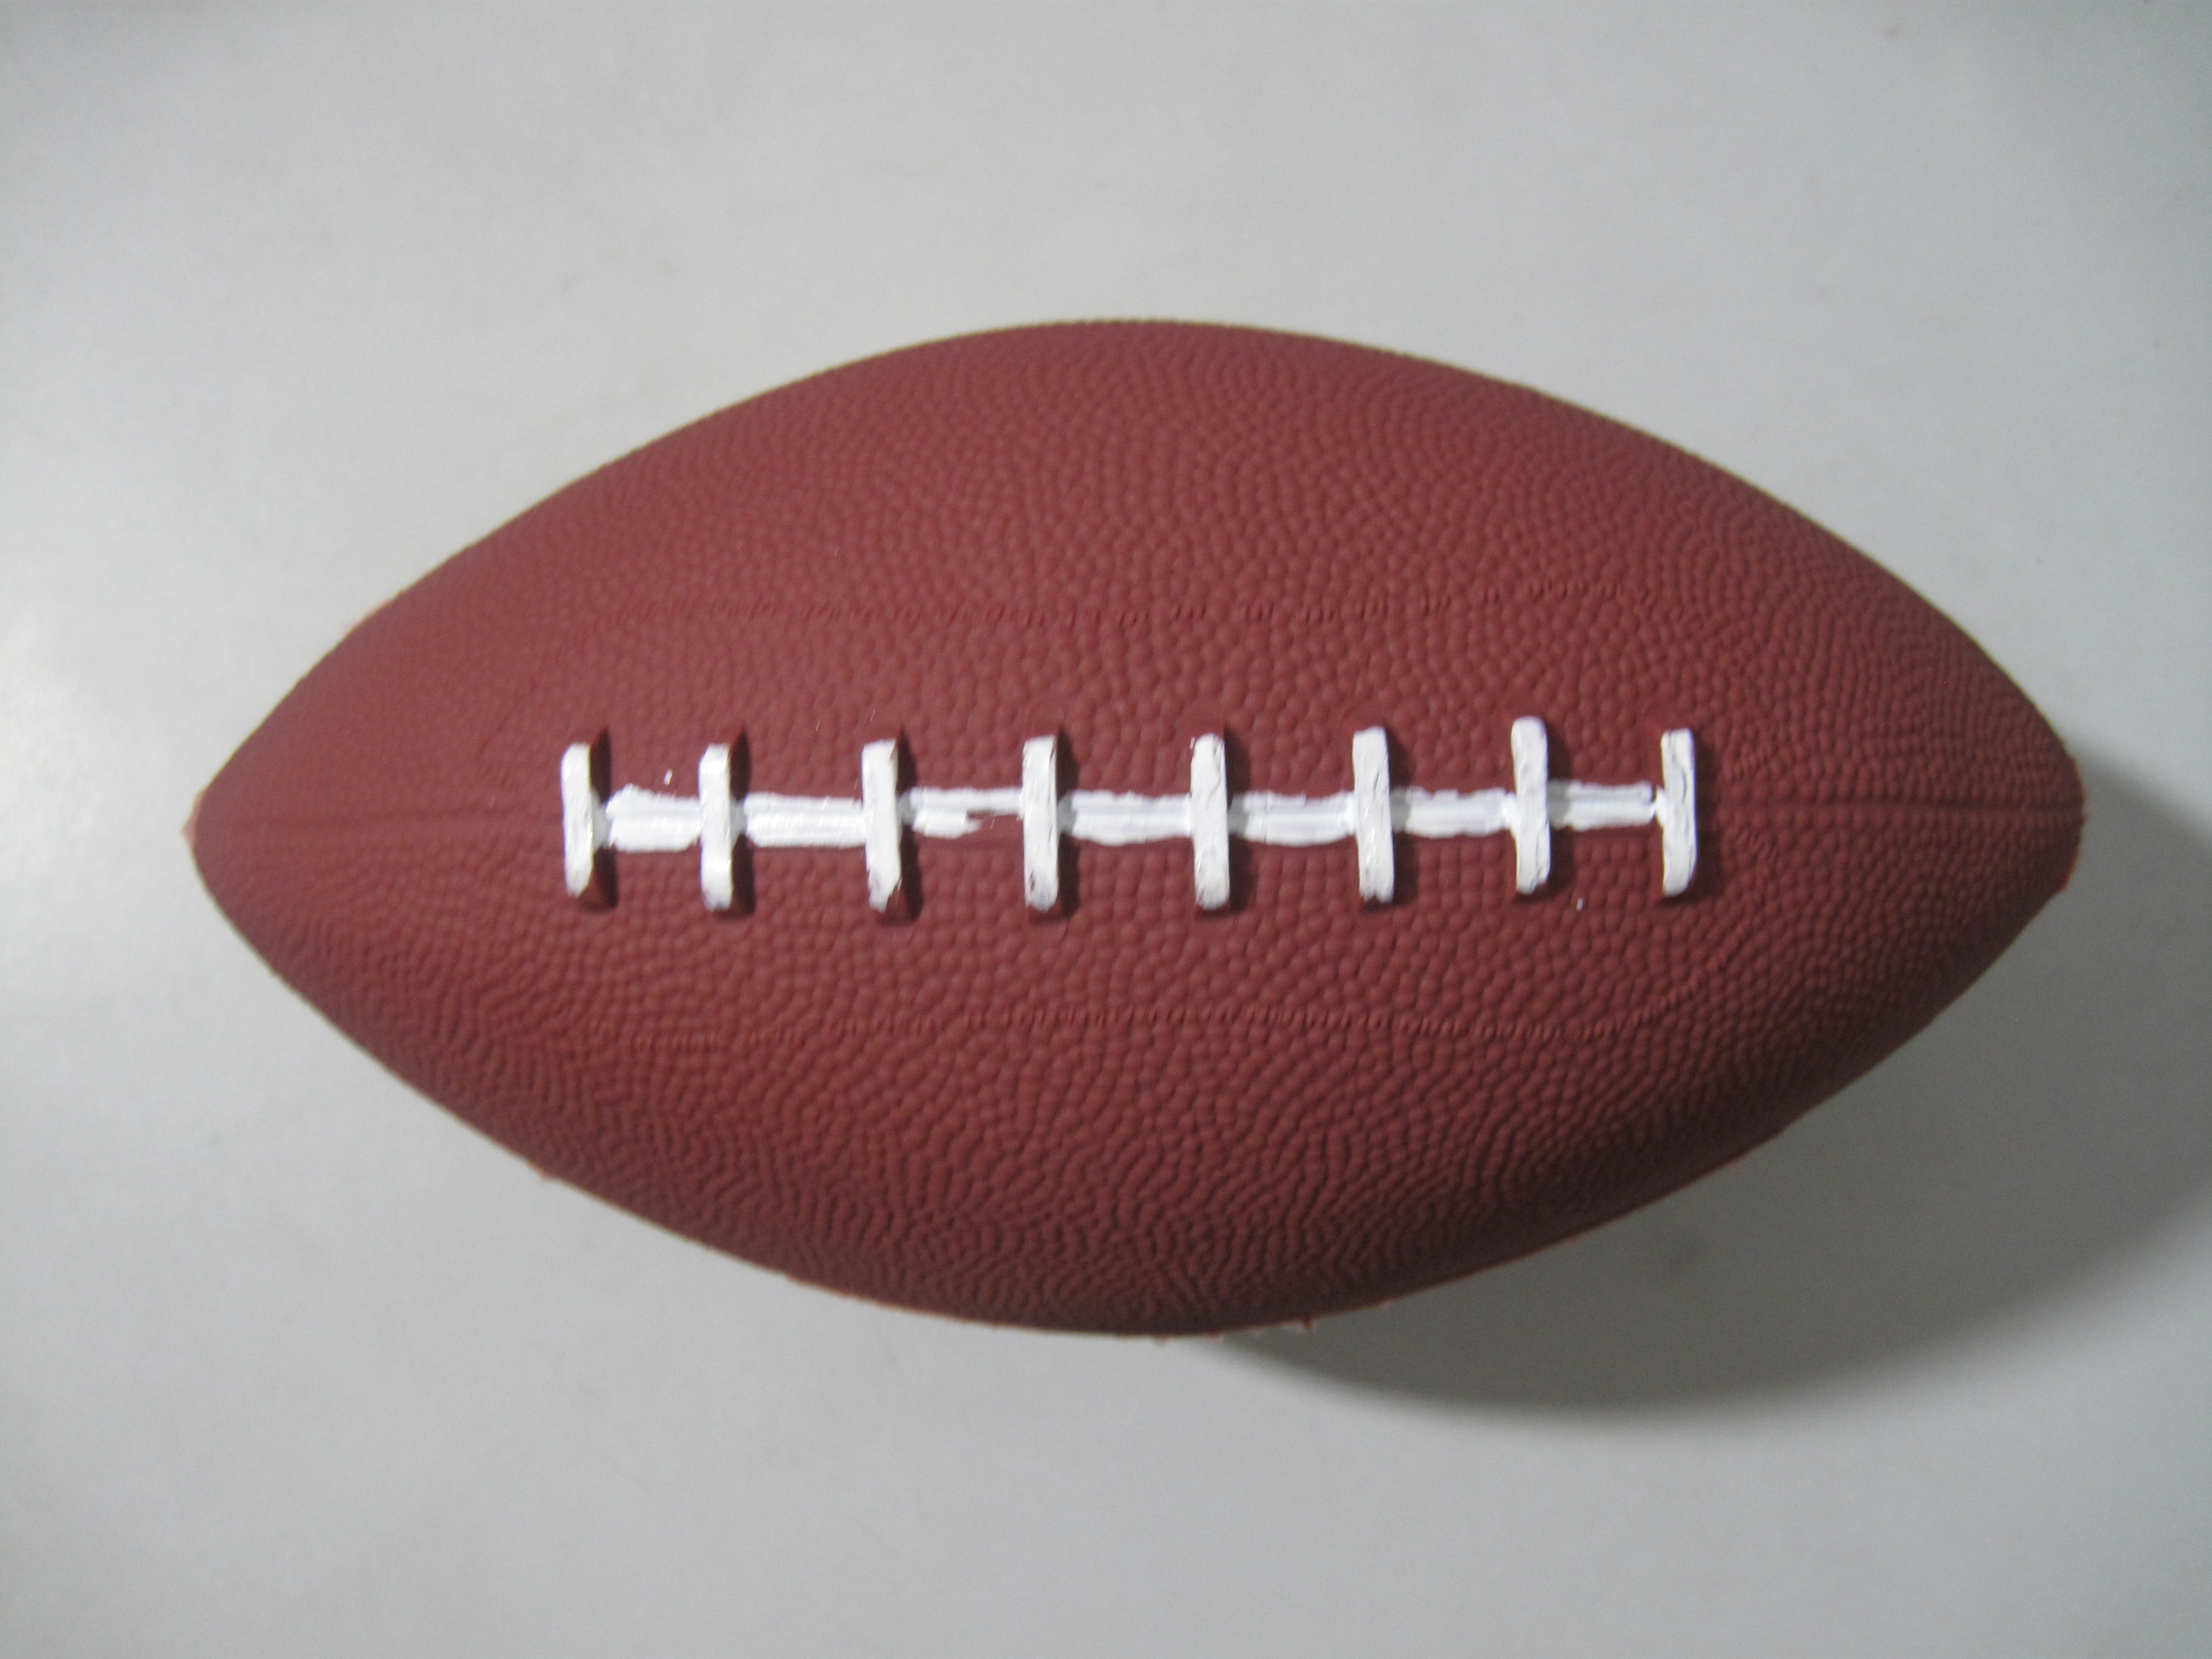 American Football / Rugby Ball–Outdoor and Indoor Sport Balls